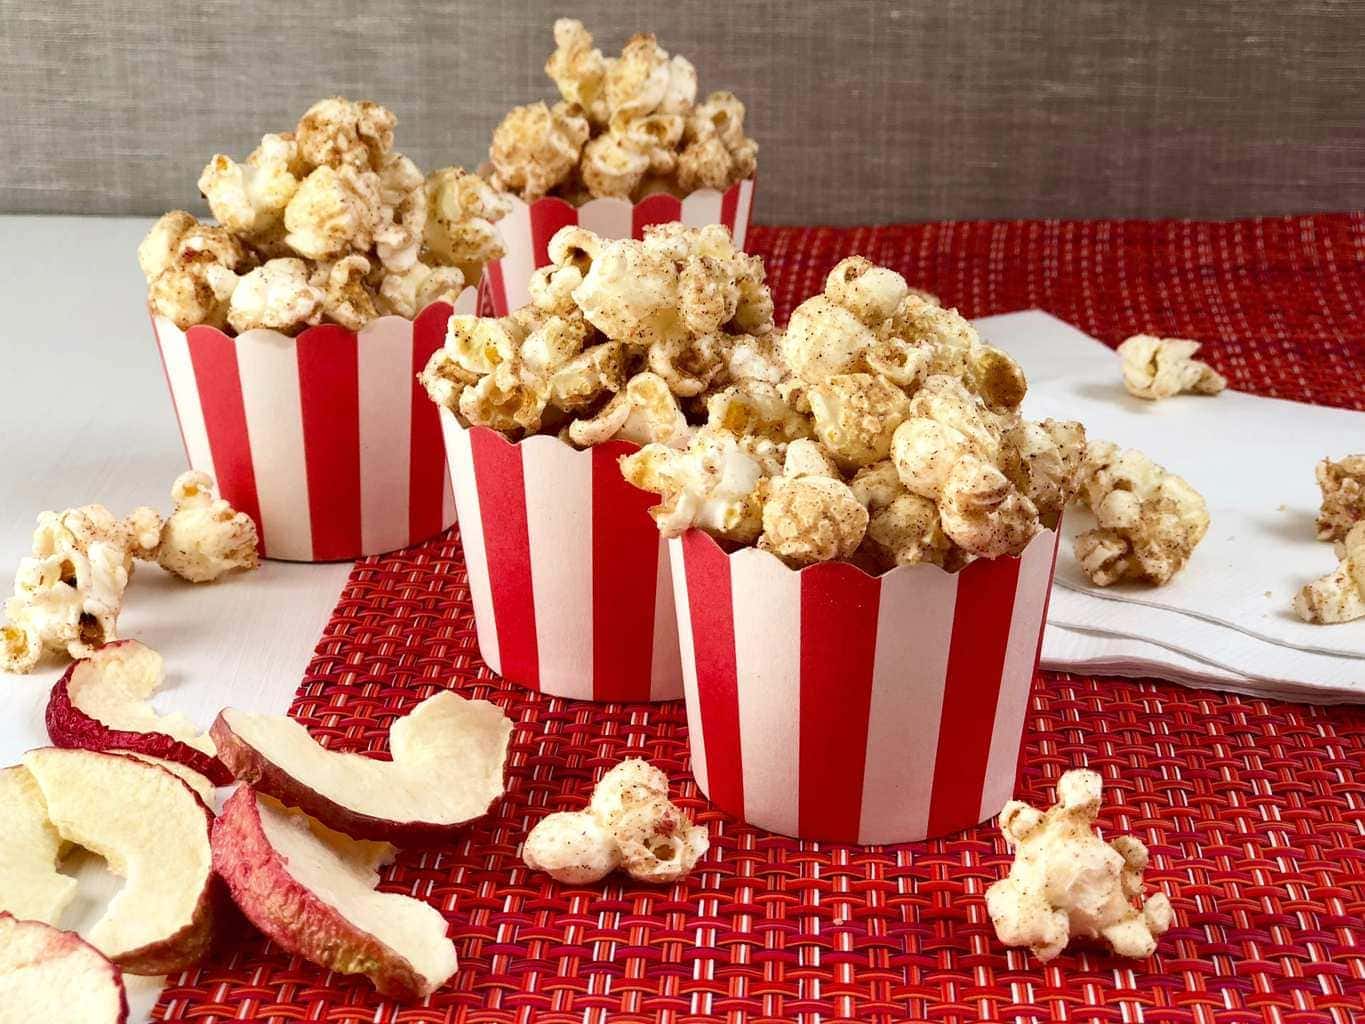 Apple cinnamon popcorn in red and white cups on red placemat